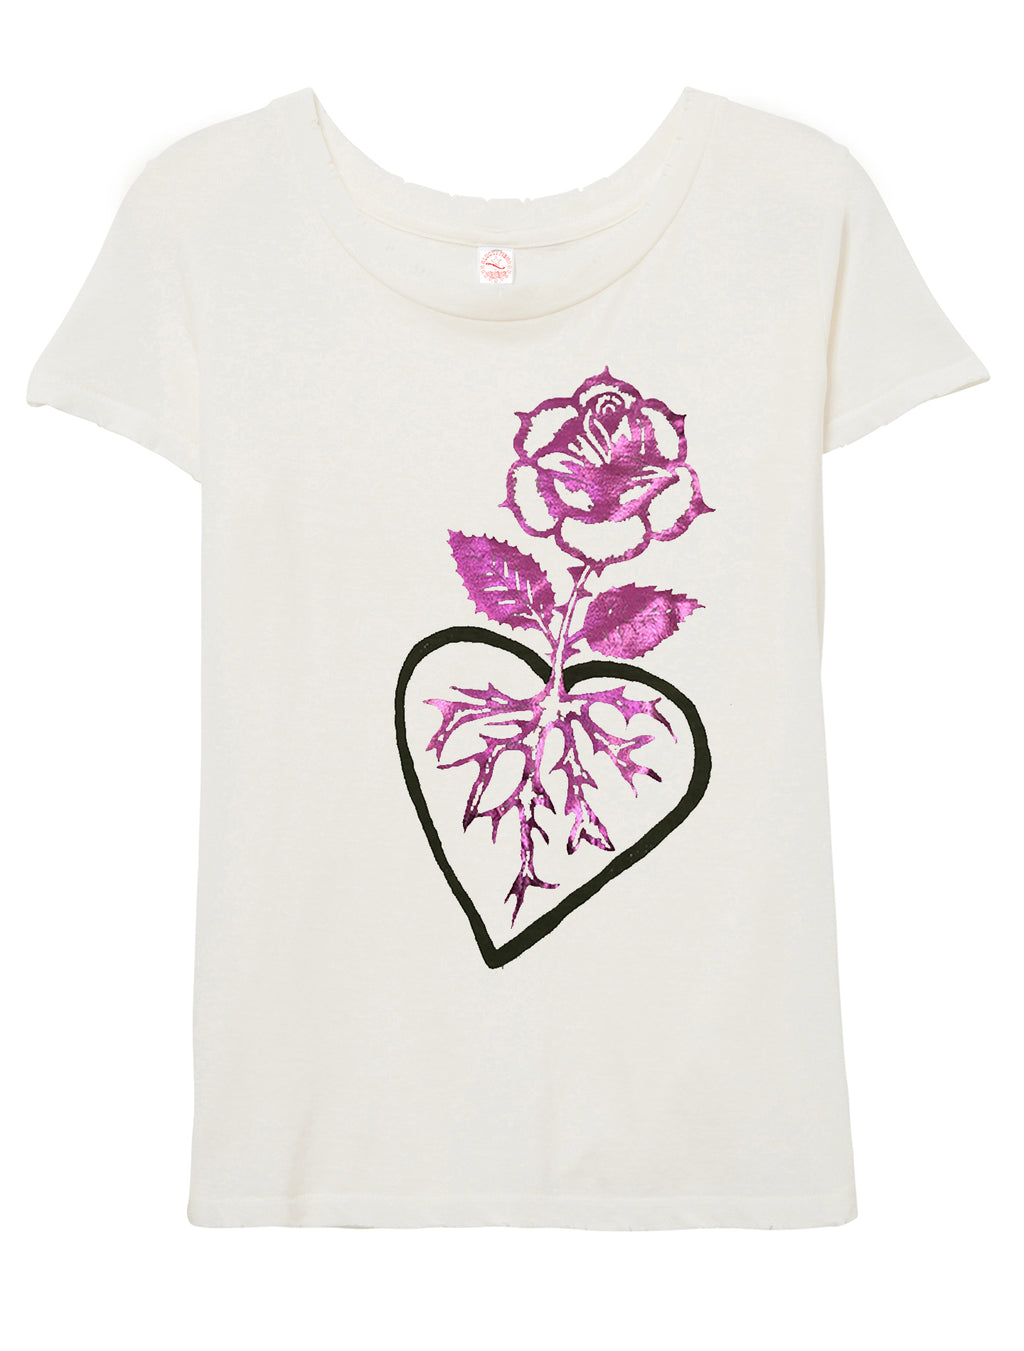 Pink Foil Rooted in Love "Destroyed T-shirt"